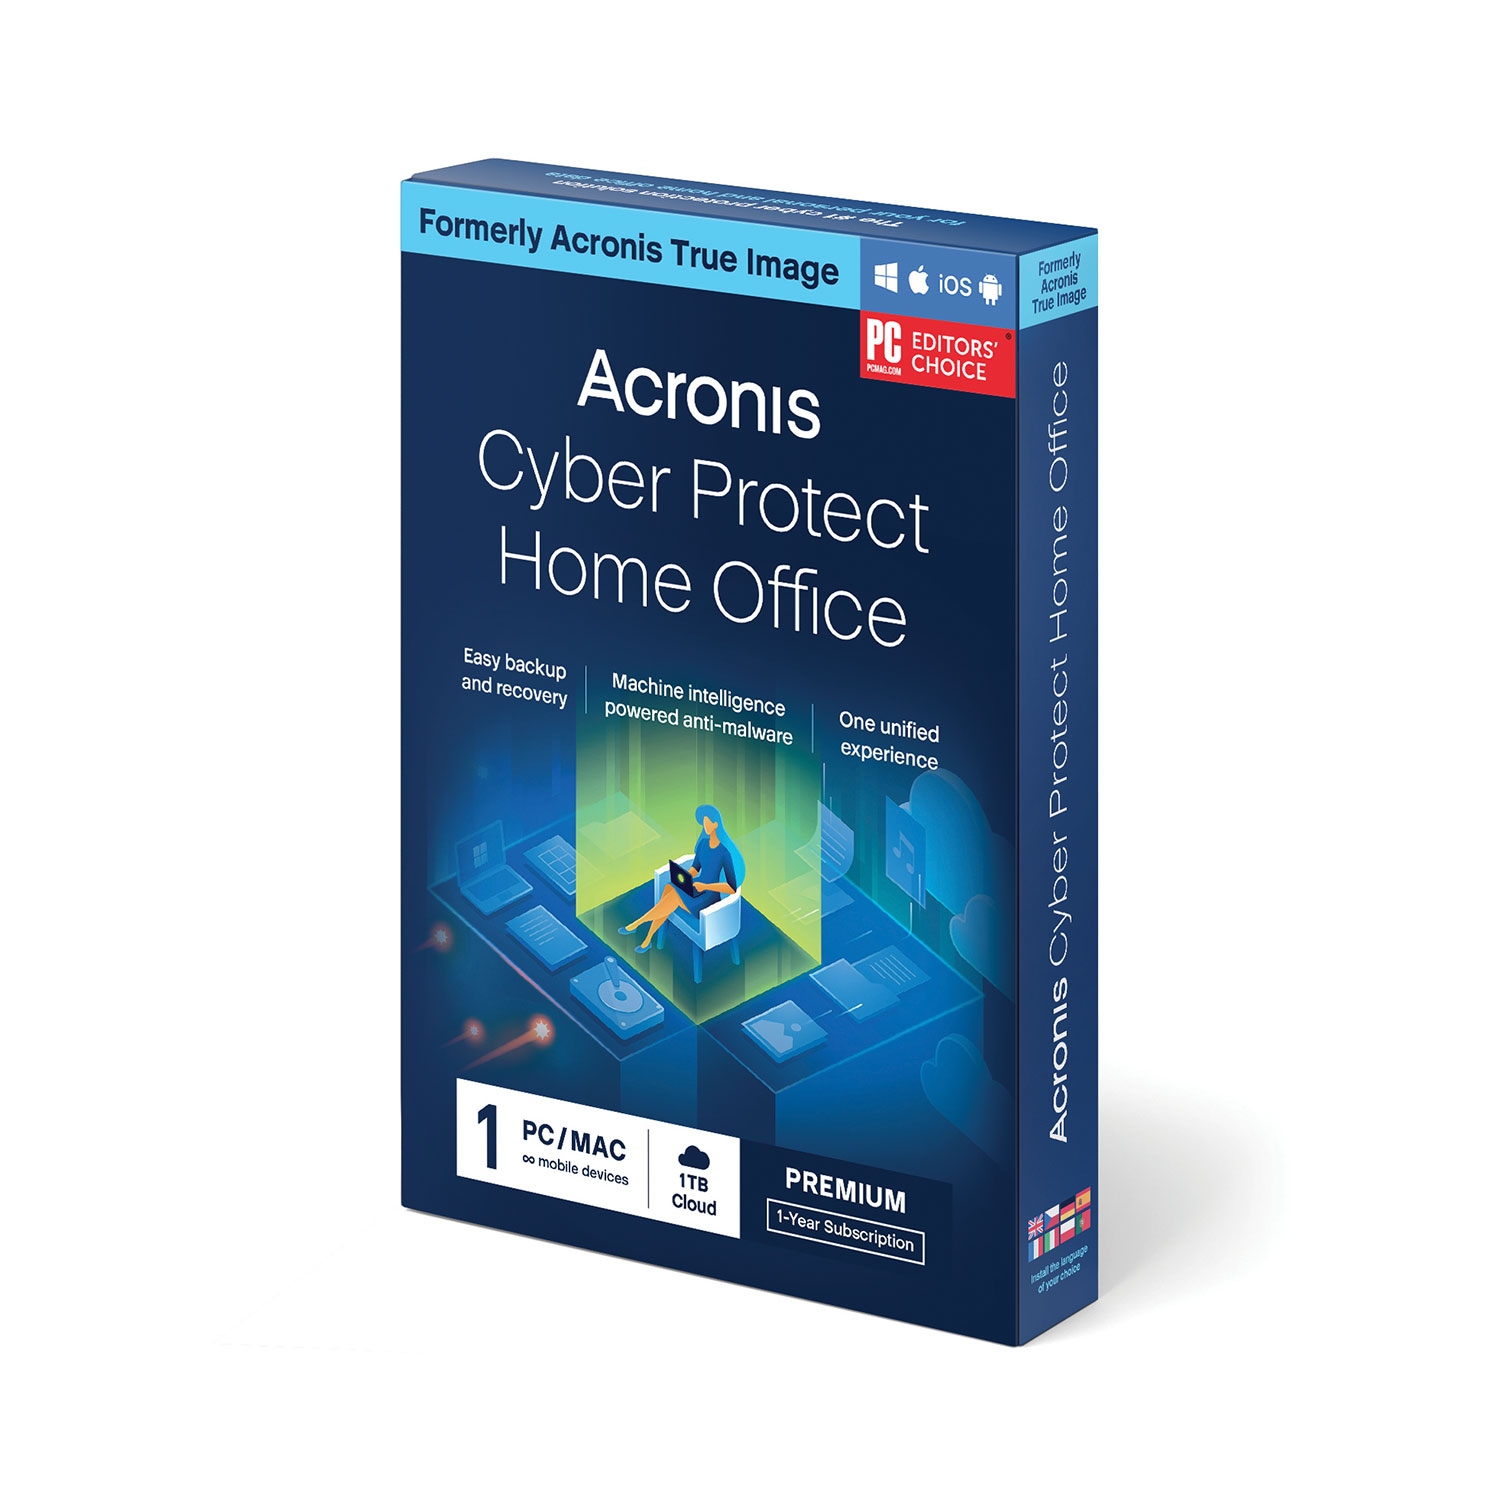 Virensoftware »Cyber Protect Home Office Premium +«